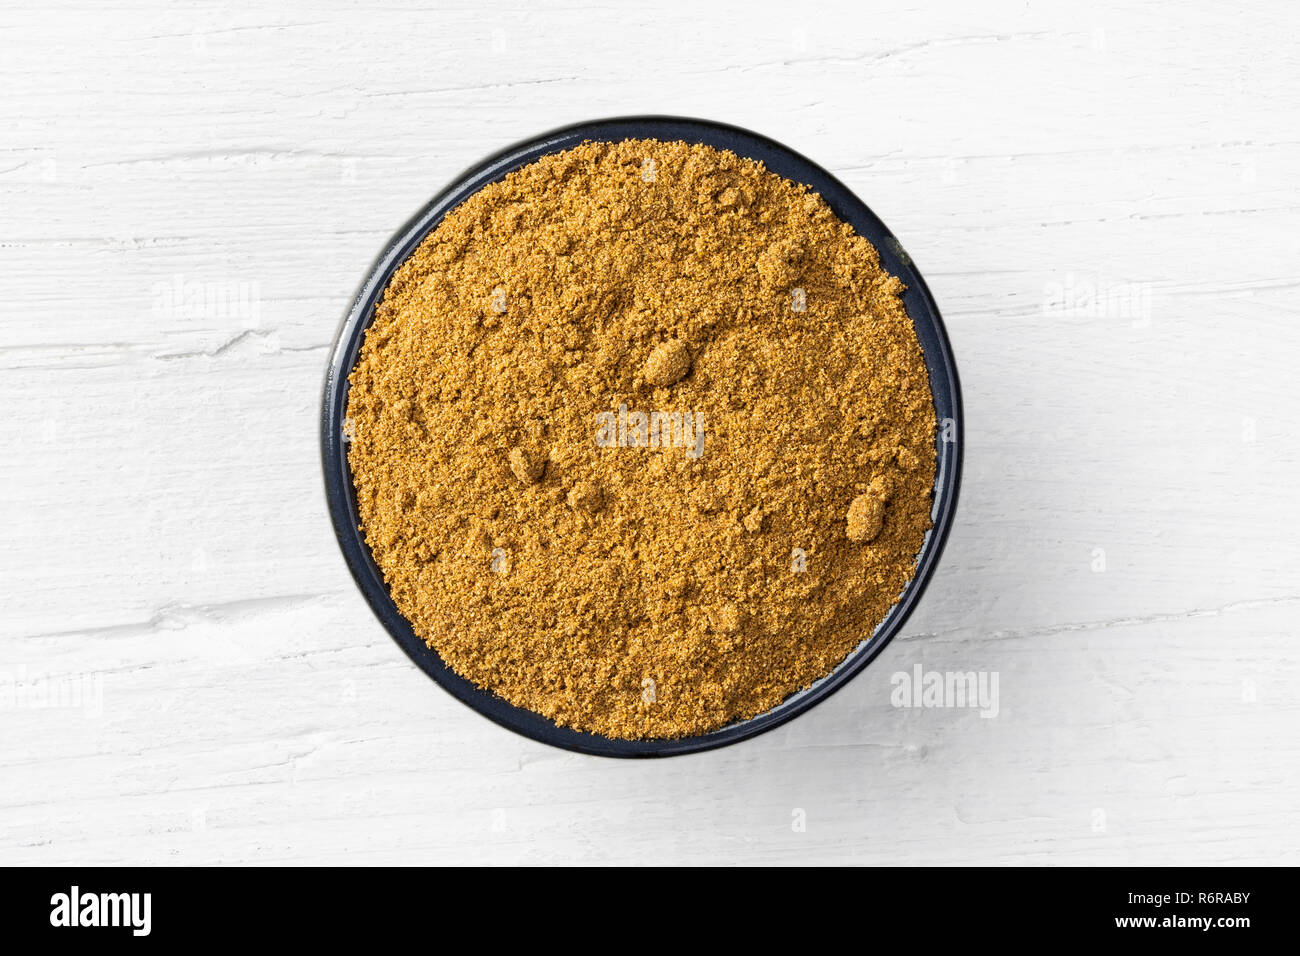 Caraway powder in round bowl on white wooden background, view directly from above. Stock Photo